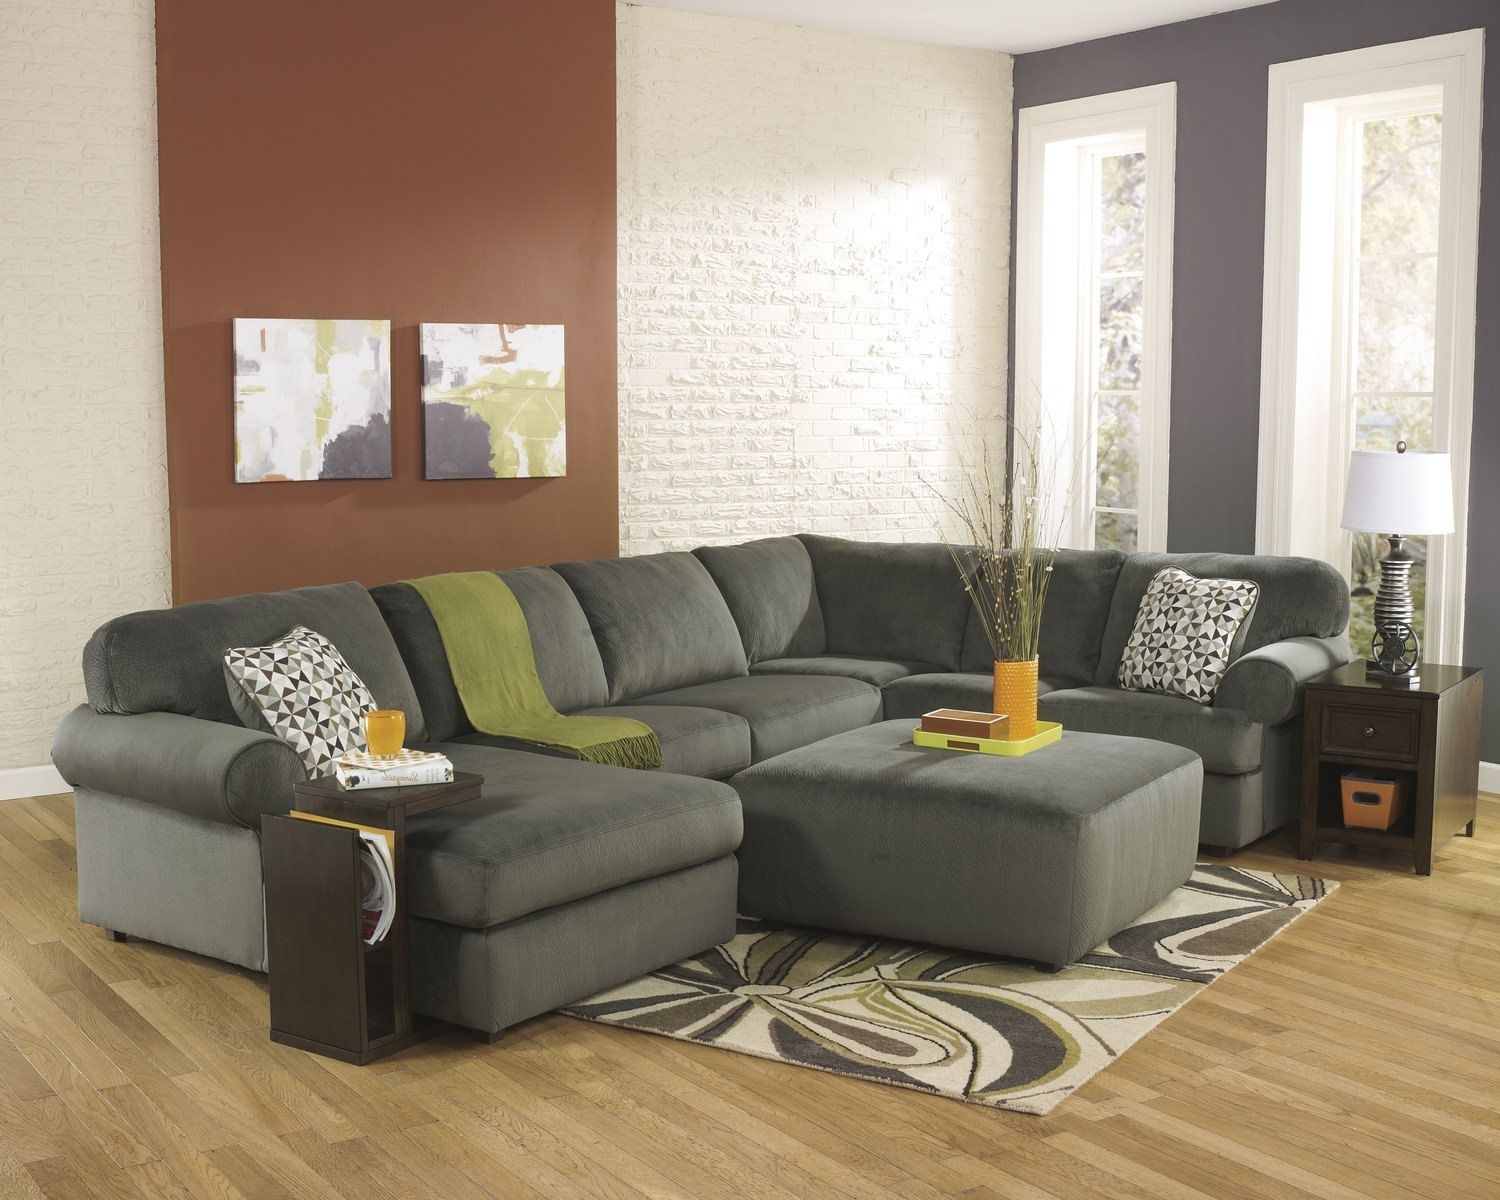 Coach 3 Piece Sectional “pewter” | Basement | Pinterest | Pewter And In Blaine 3 Piece Sectionals (View 10 of 25)